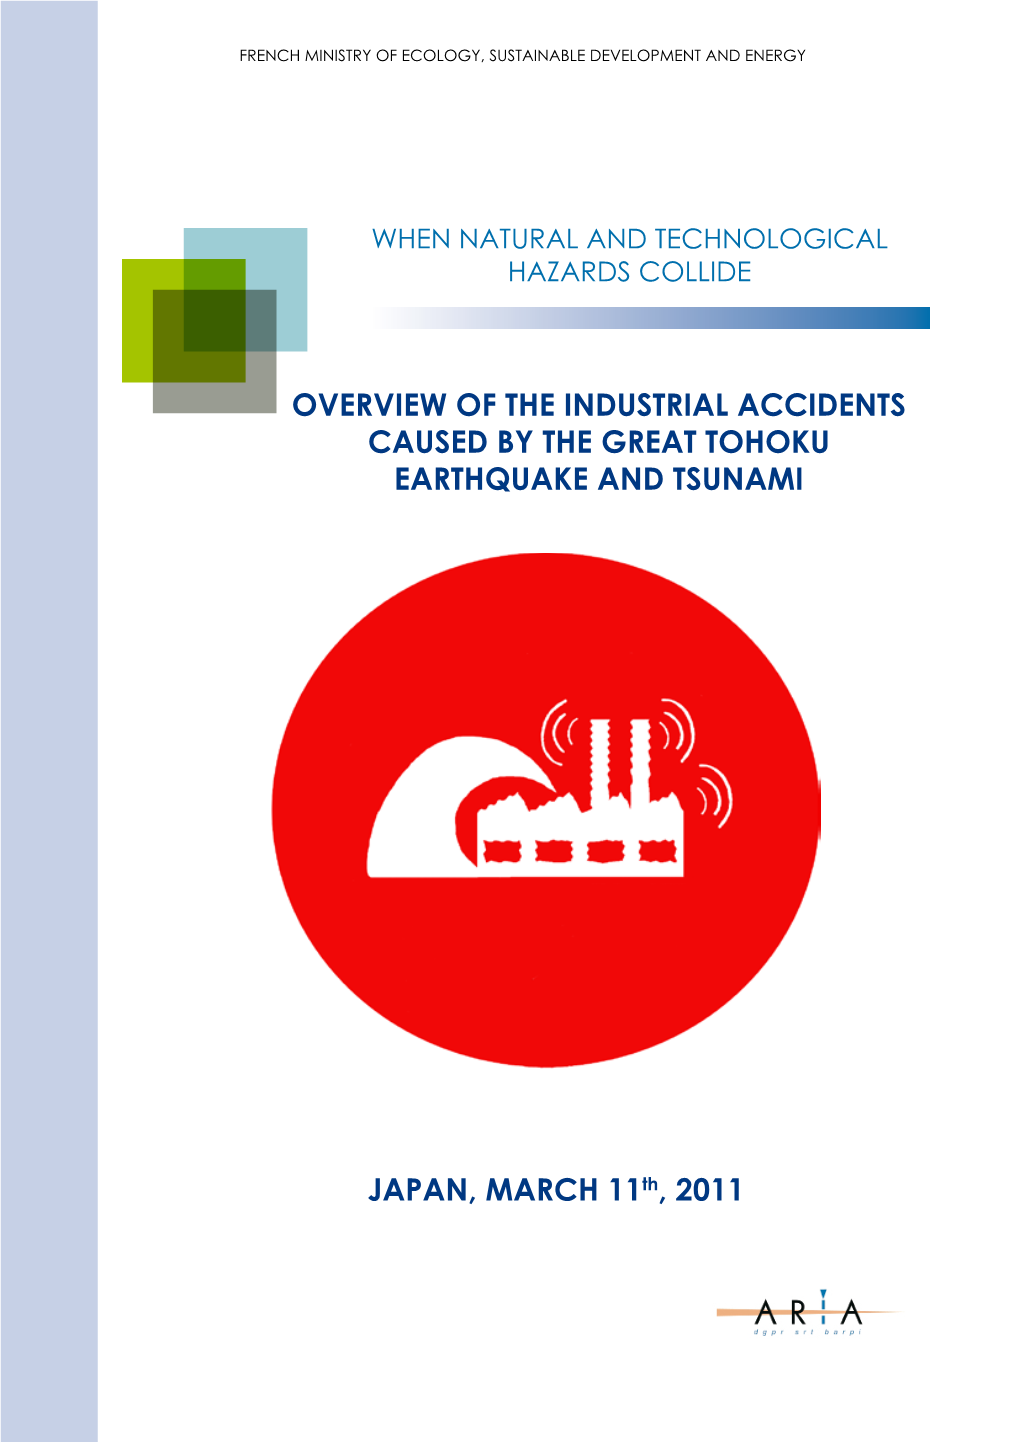 Overview of Industrial Accidents in Japan